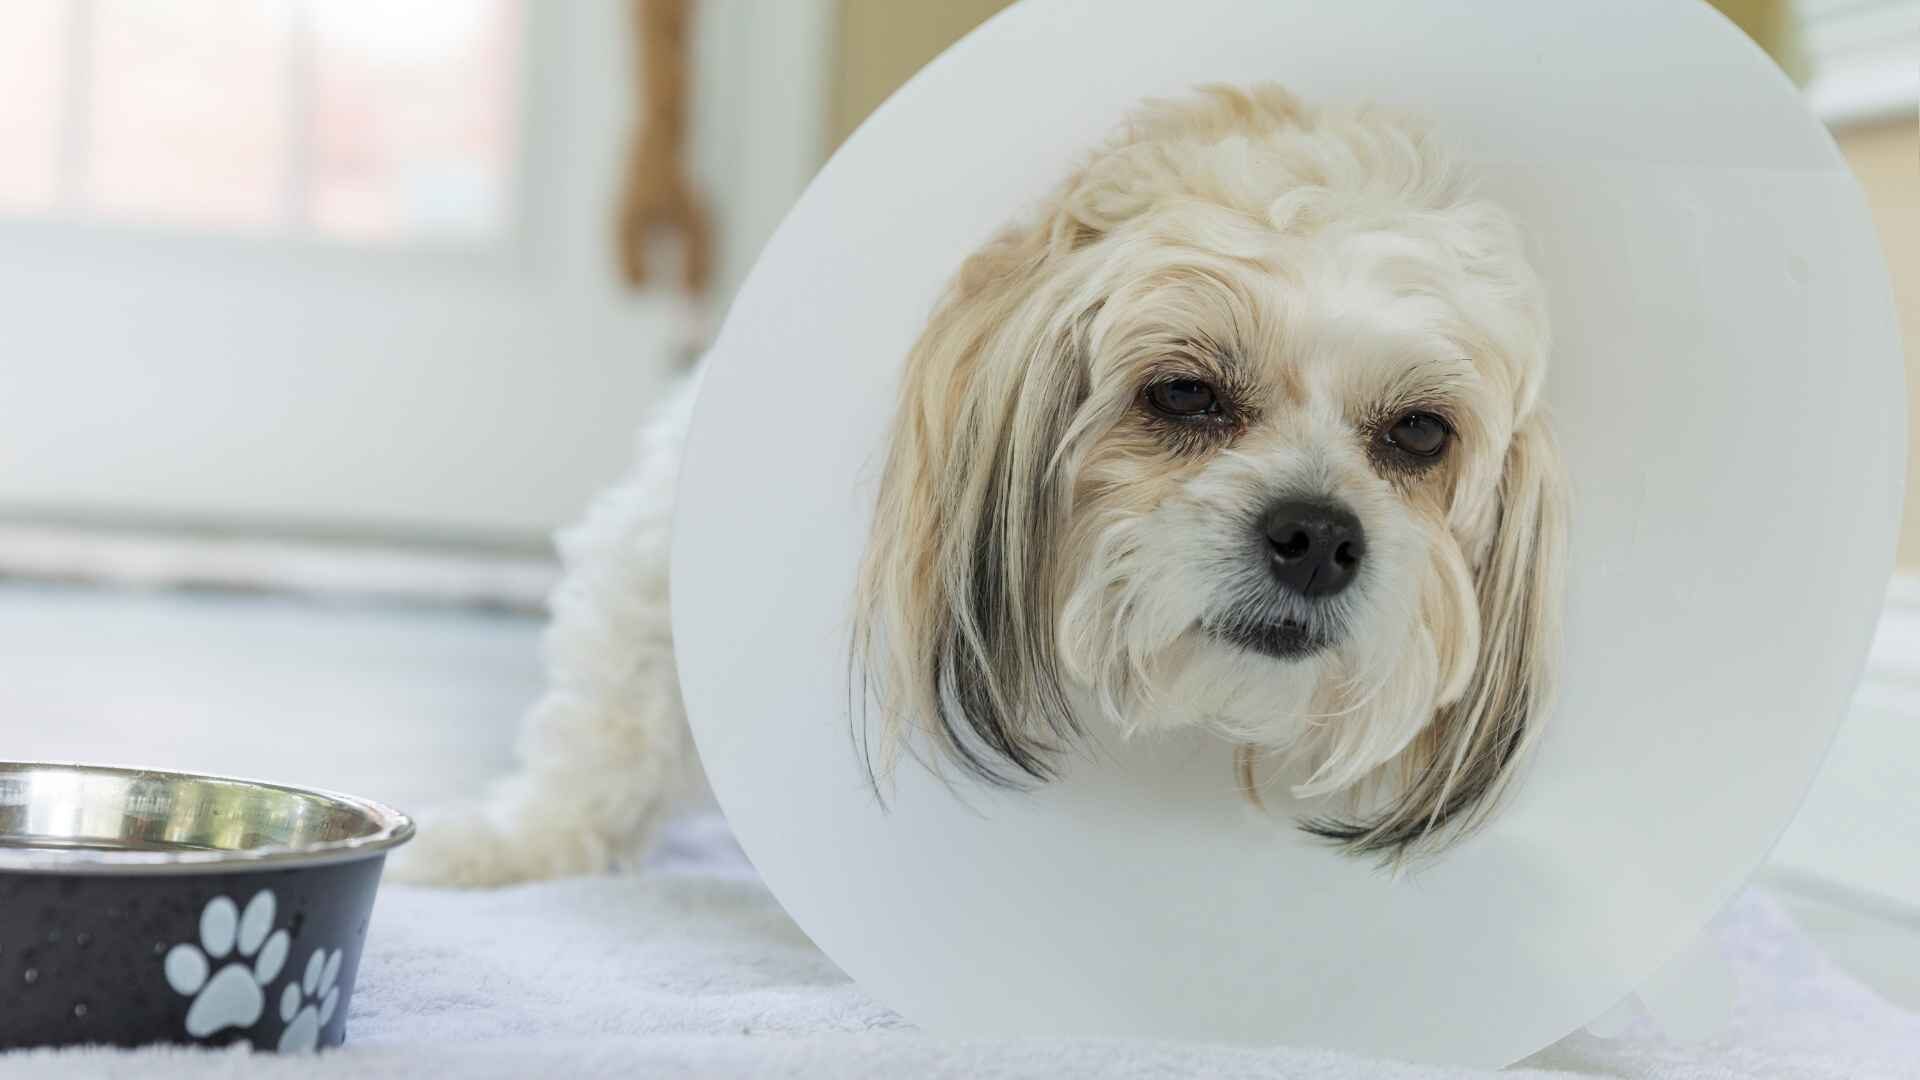 My Dog Won't Lay Down with a Cone On: What Should I Do?